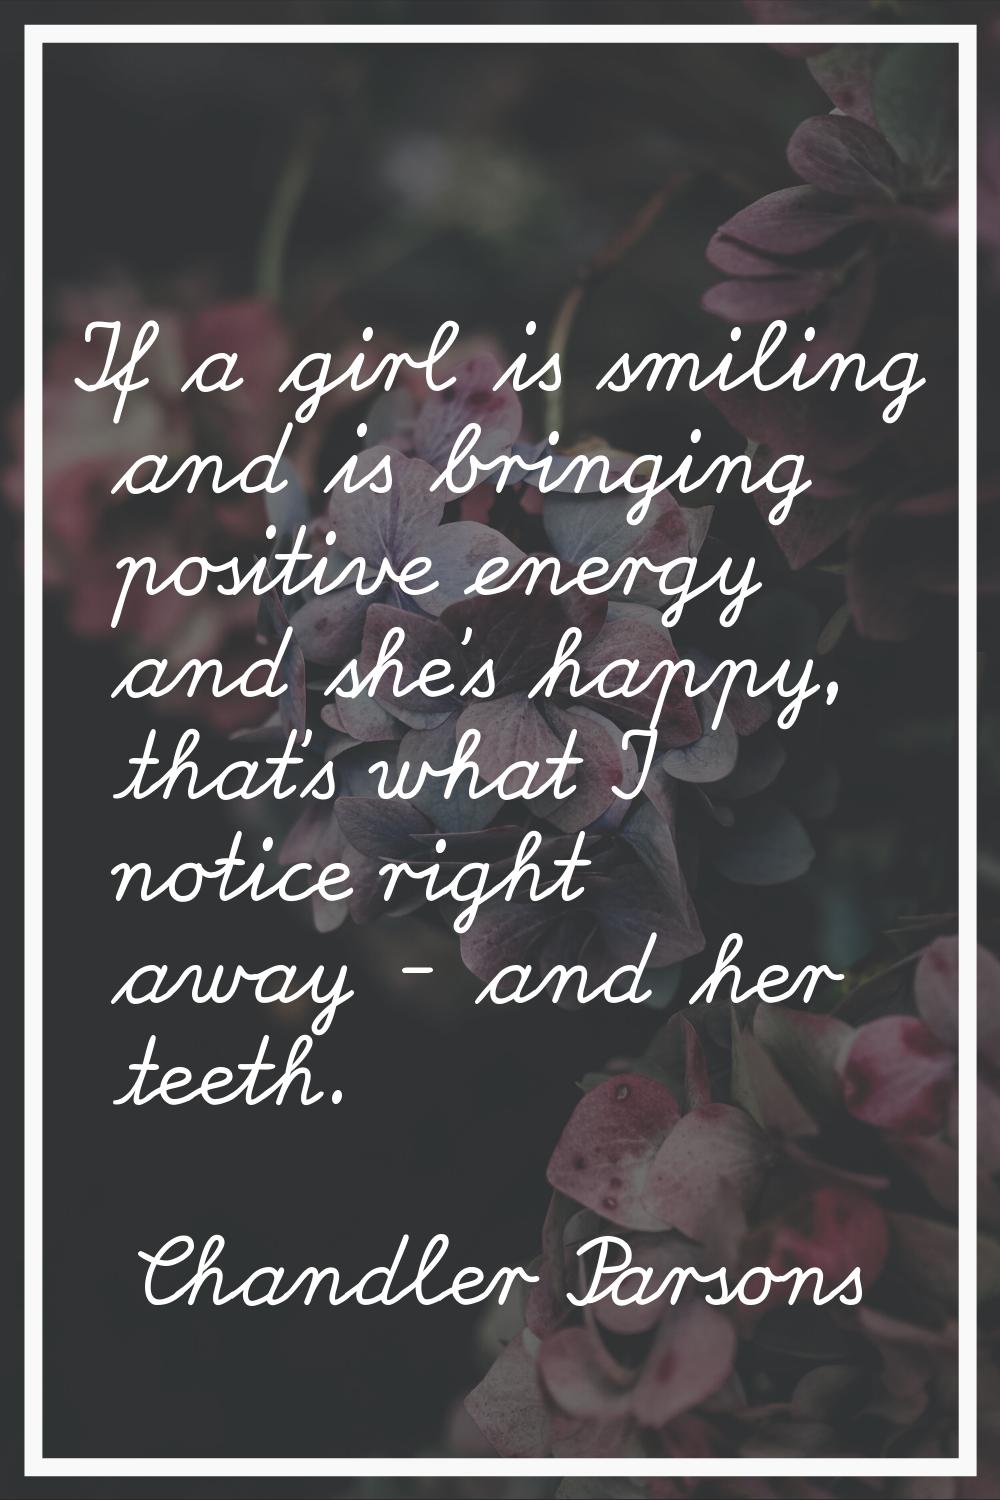 If a girl is smiling and is bringing positive energy and she's happy, that's what I notice right aw